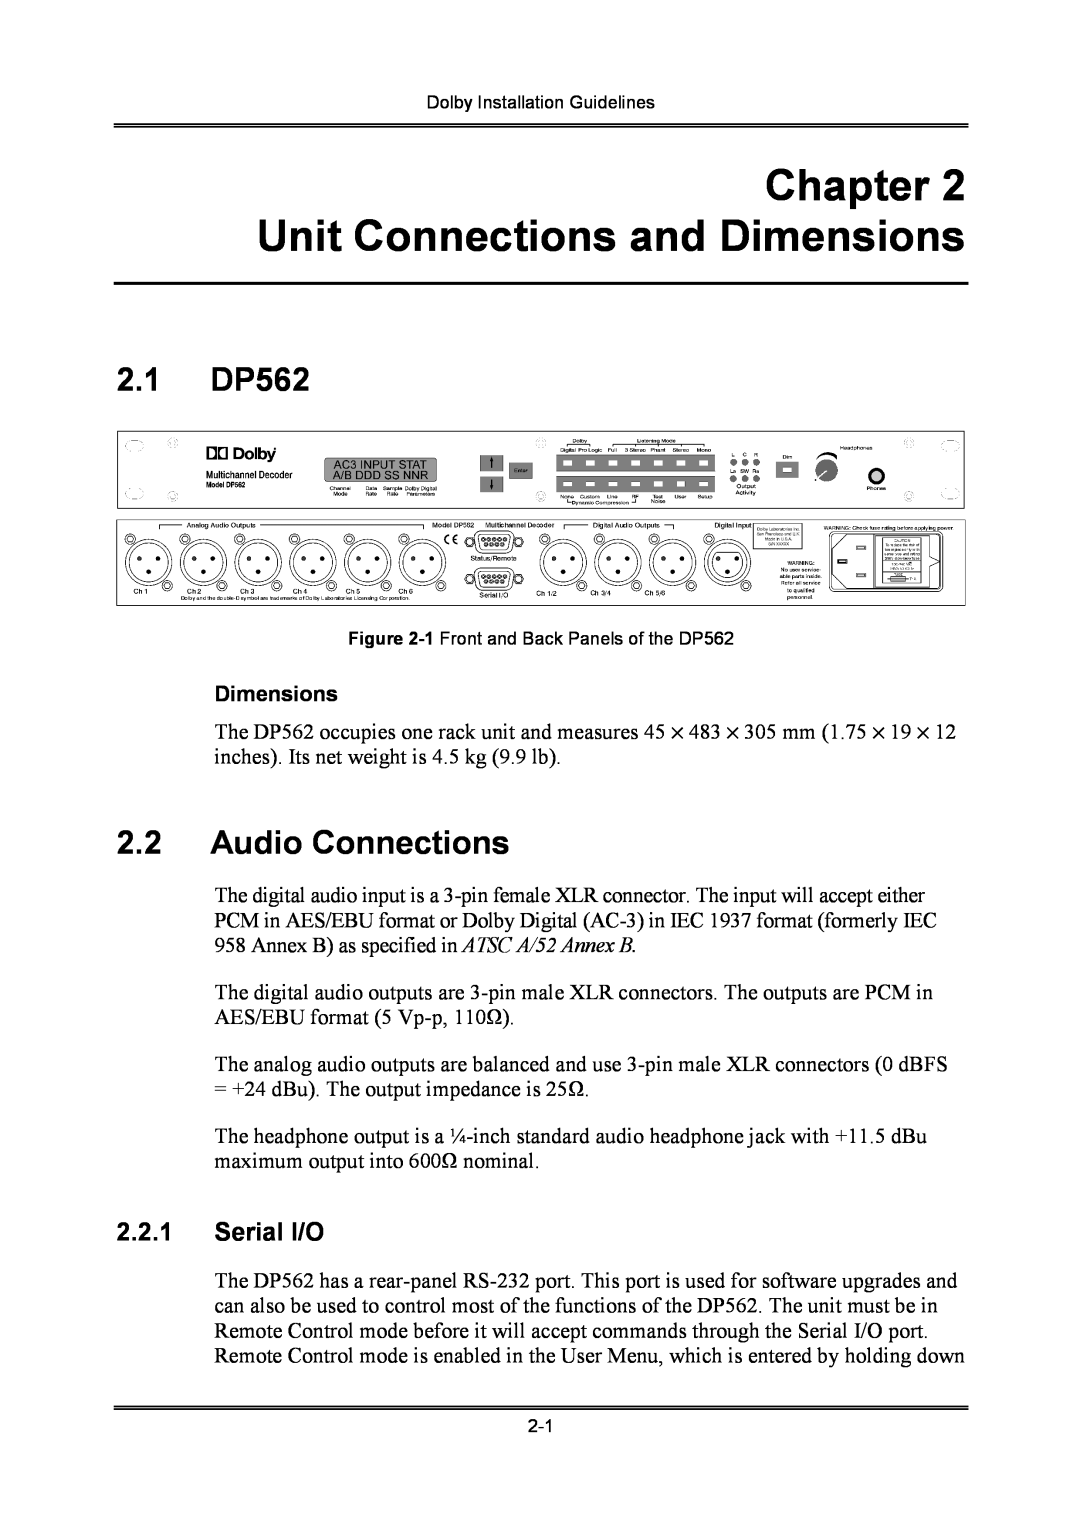 Dolby Laboratories S01/13621 manual Unit Connections and Dimensions, 2.1DP562, 2.2Audio Connections, 2.2.1Serial I/O 